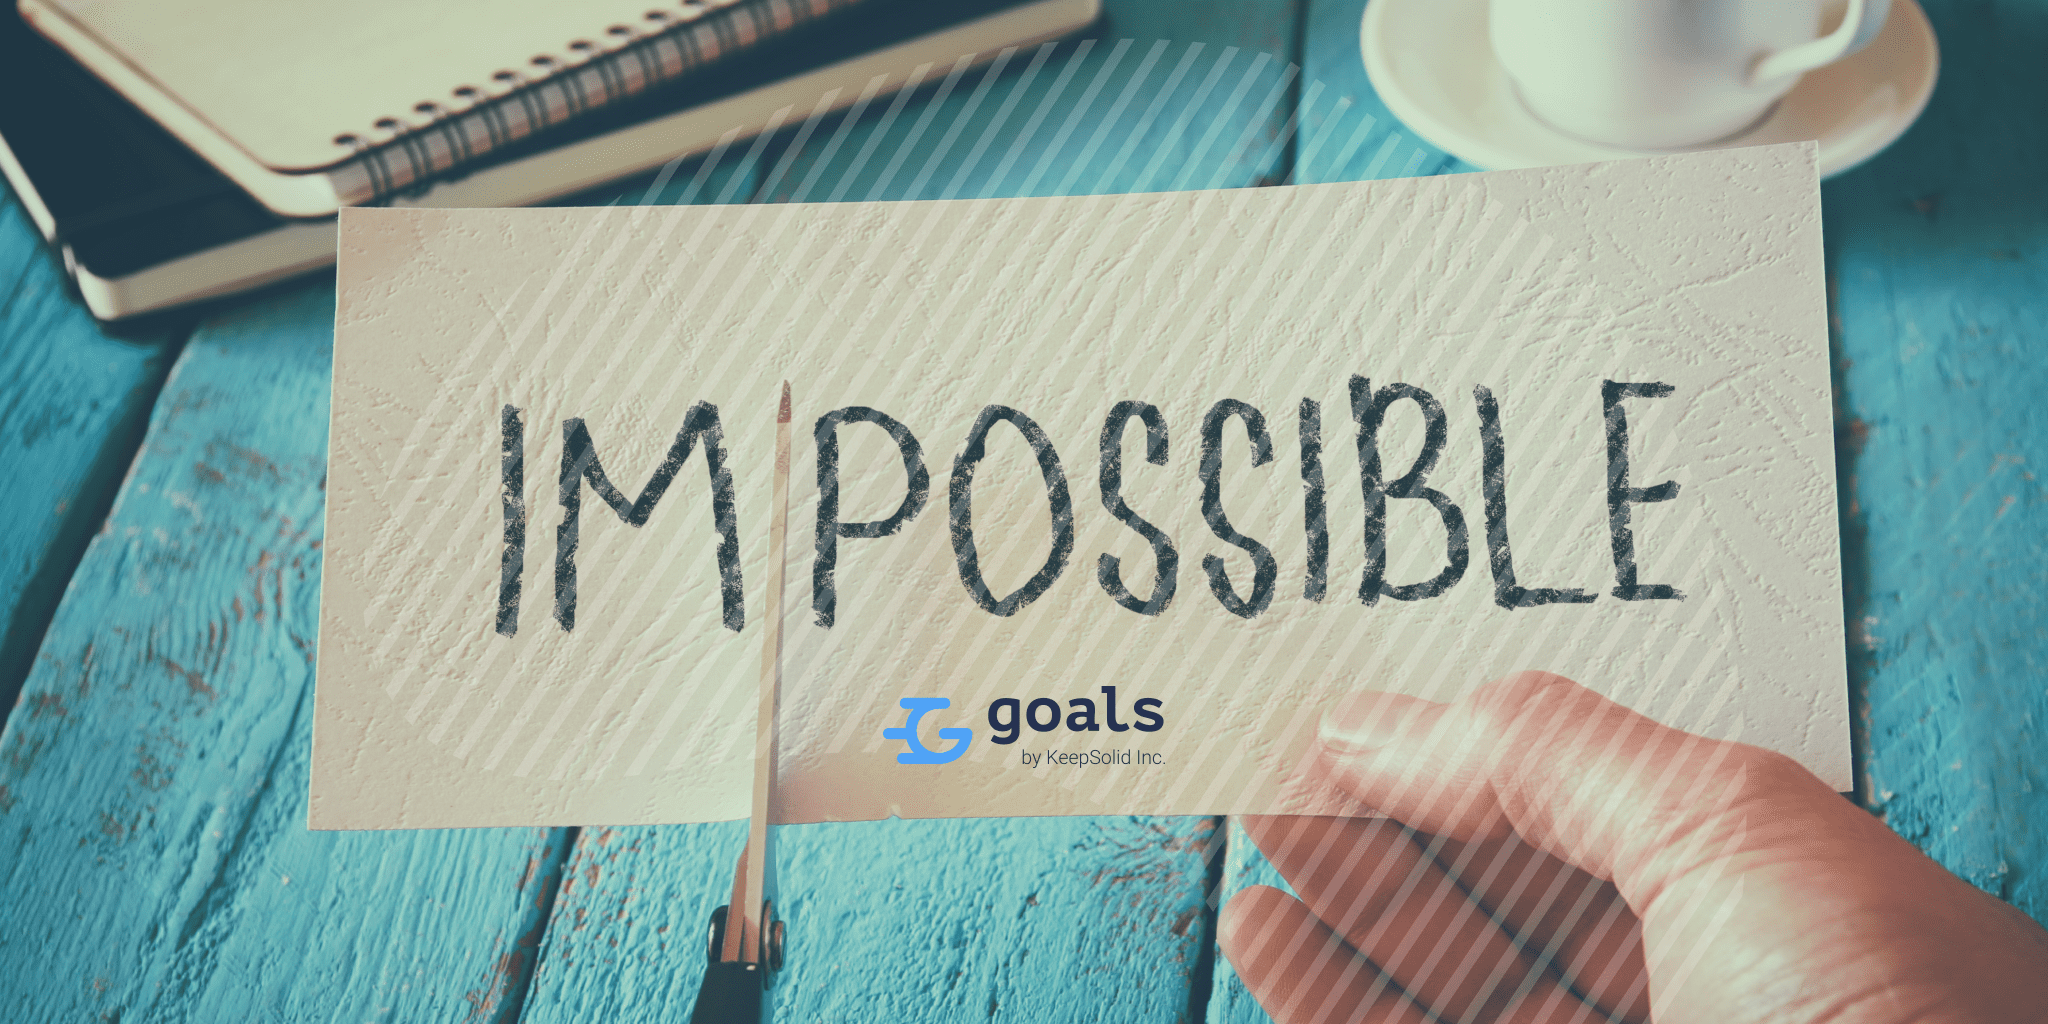 Goal setting tip: Make your goals challenging yet possible to achieve